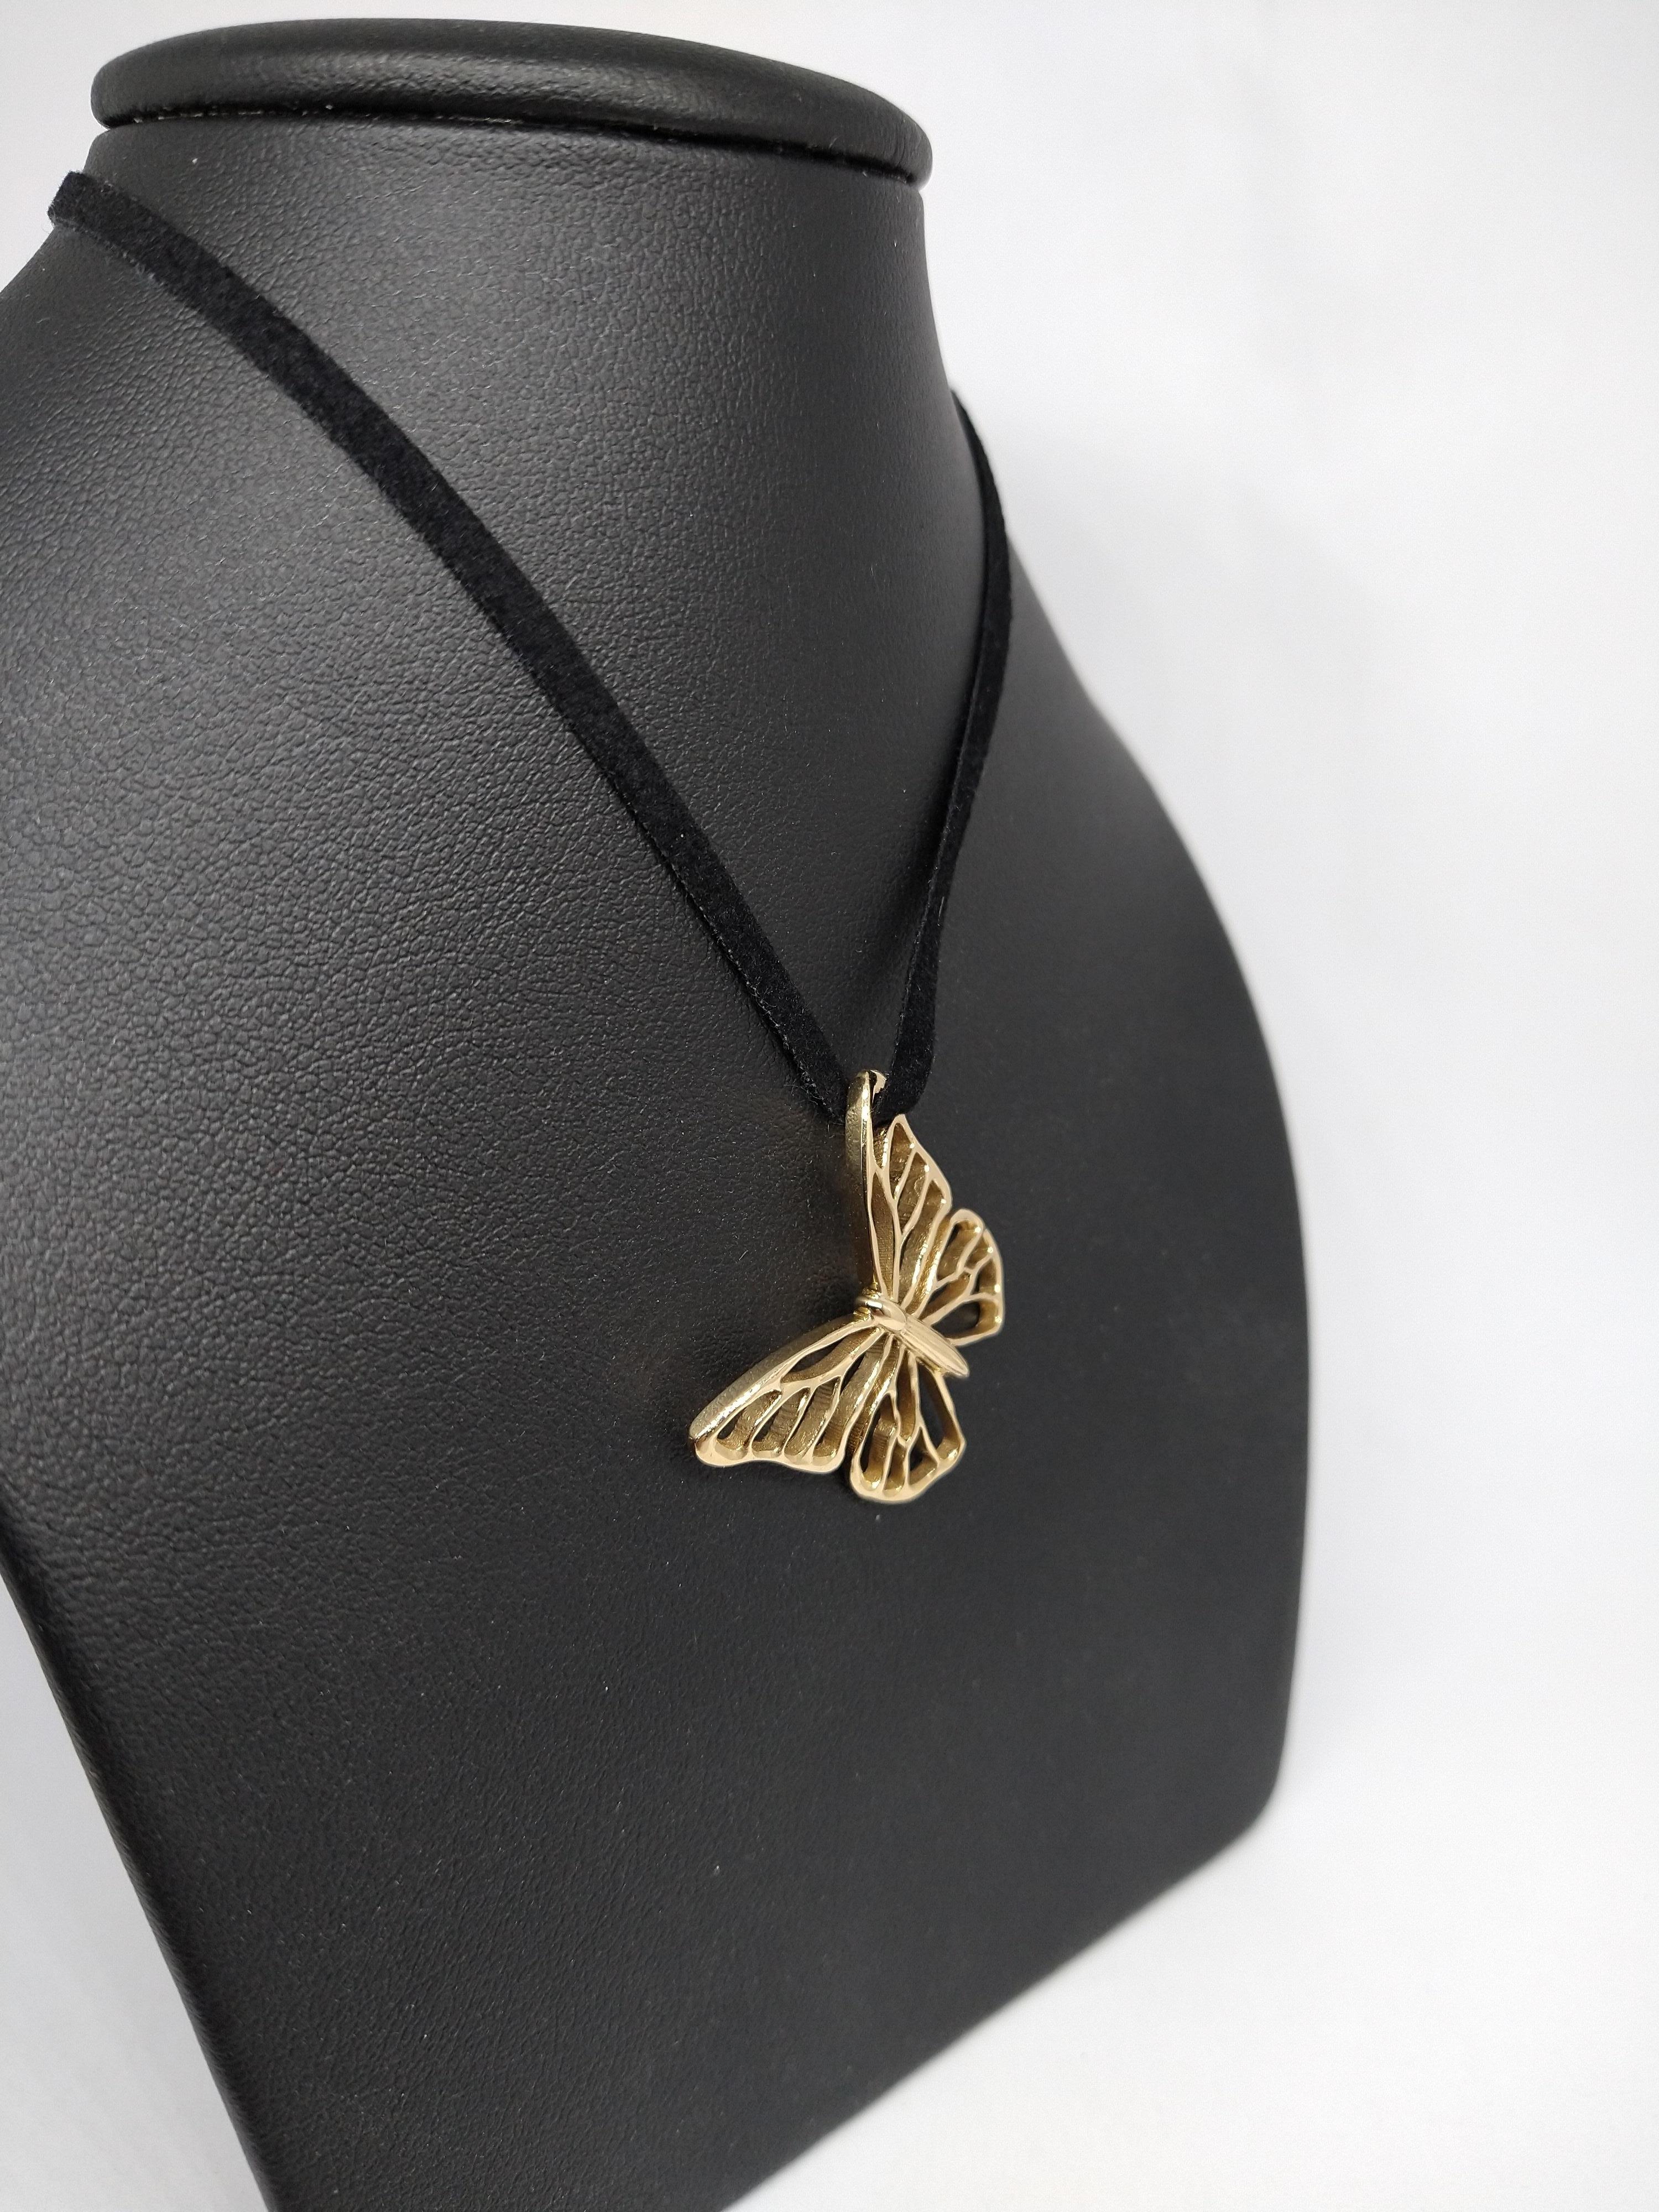 Tiffany designer, Thomas Kurilla created this 14 Karat Yellow Gold Butterfly Necklace on Suede, K.I.S.S. Keep it simple seasonally. Come on, who can design better than God? Butterflies must be one of his specialties, with the colors and the